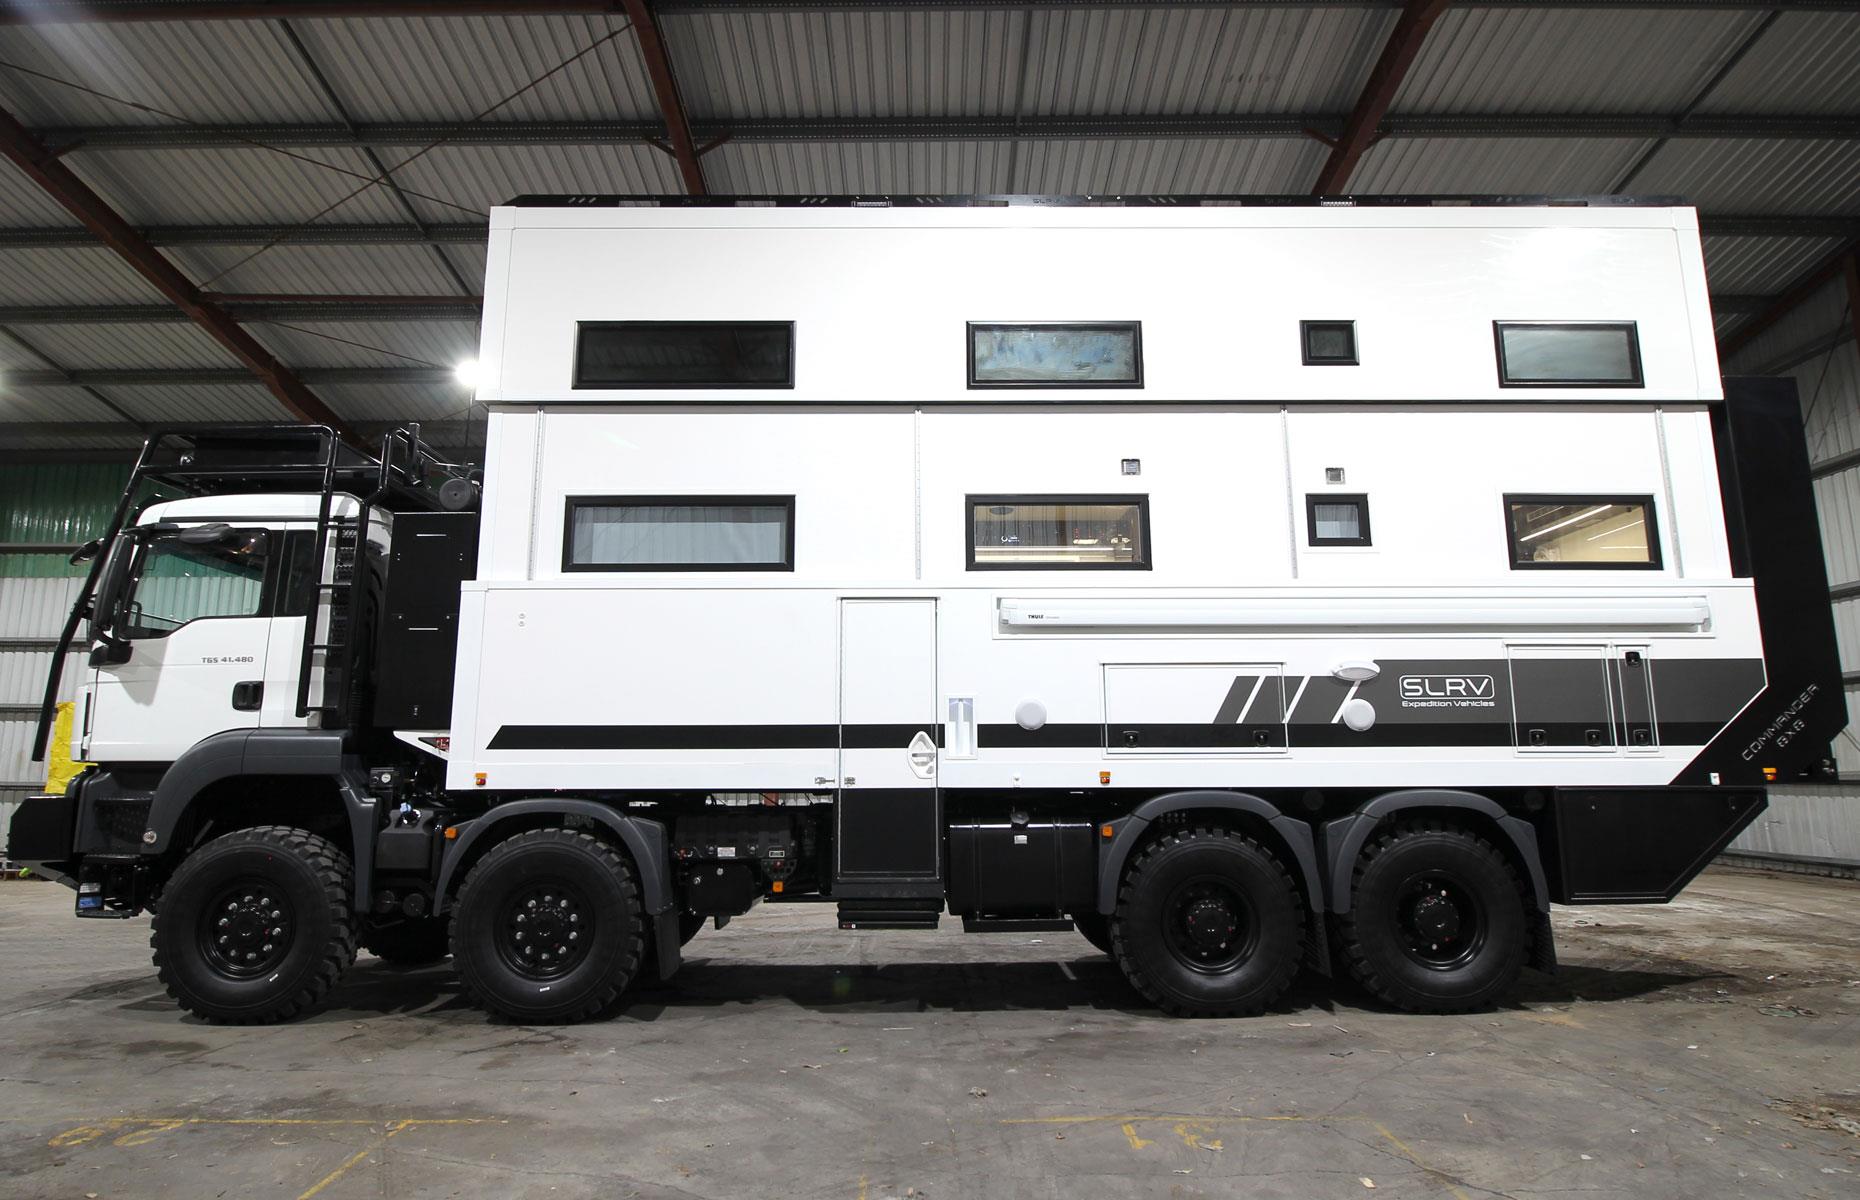 <p>SLRV went all out and responded with an “apocalypse-grade” vehicle. The robust Commander 8x8 is built on a military-grade MAN TGS truck base, with walls up to five inches thick and durable double-glazed windows.</p>  <p>At 40 feet long, the Commander 8x8 ranks among the biggest RVs in the world. The vast motorhome runs on lithium batteries fueled by solar panels and a diesel-powered backup generator and alternator. </p>